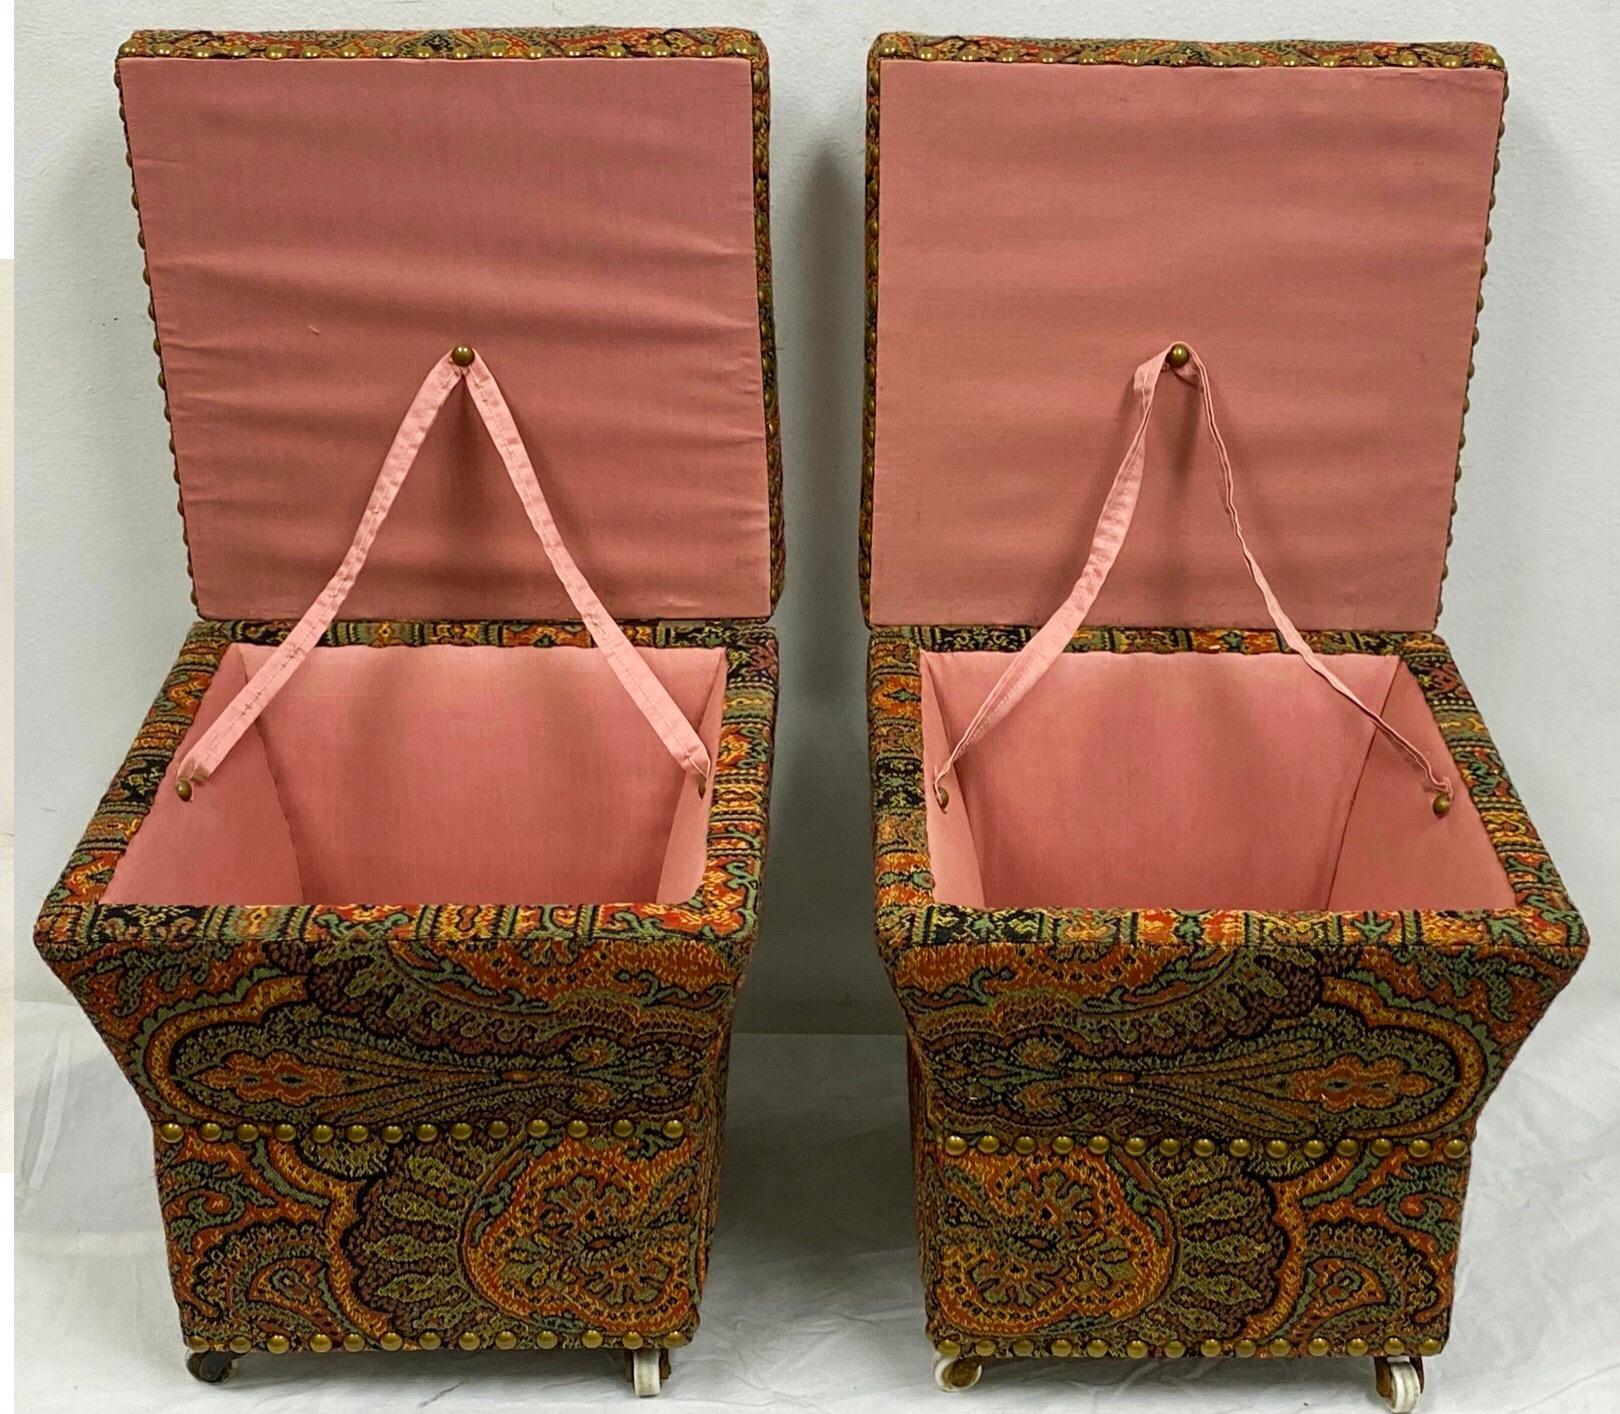 20th Century English Paisley Upholstered Storage Ottomans, a Pair For Sale